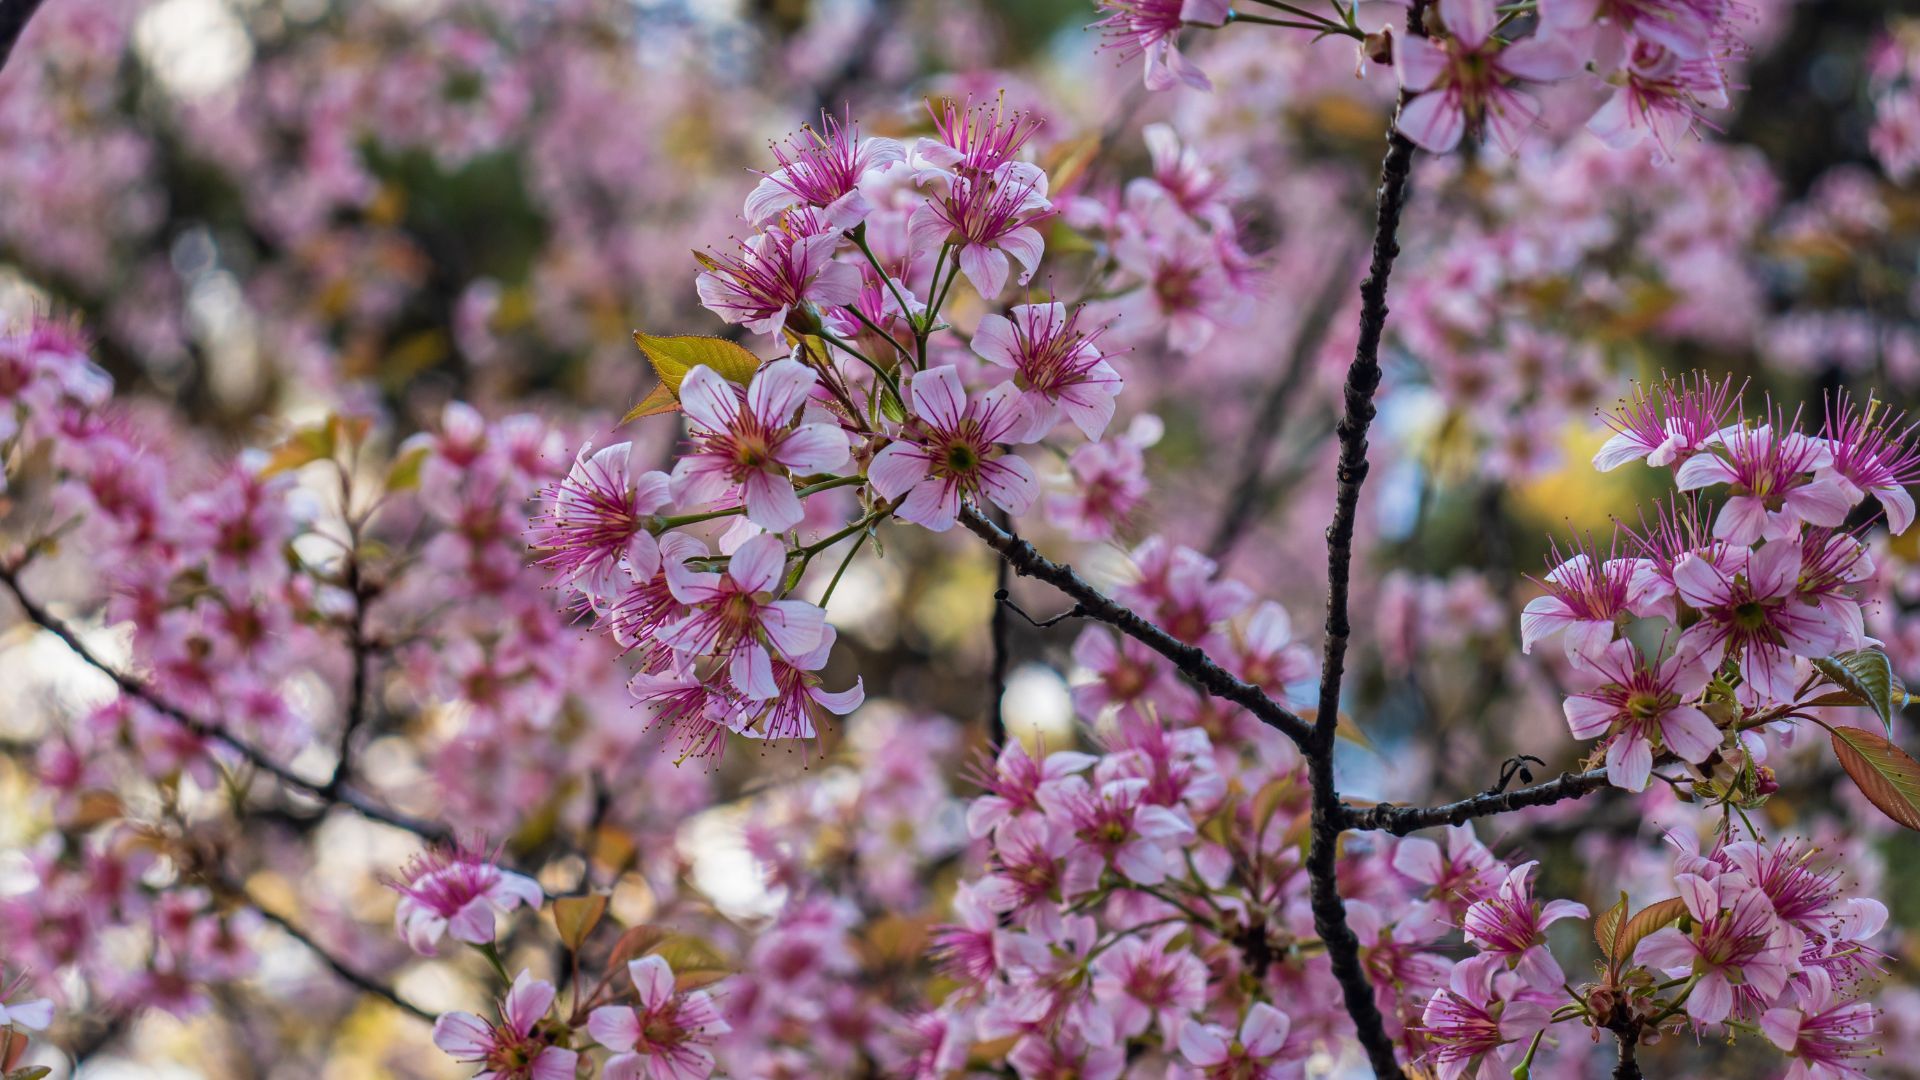 Shillong Cherry Blossom Festival Cancelled. Here's Why